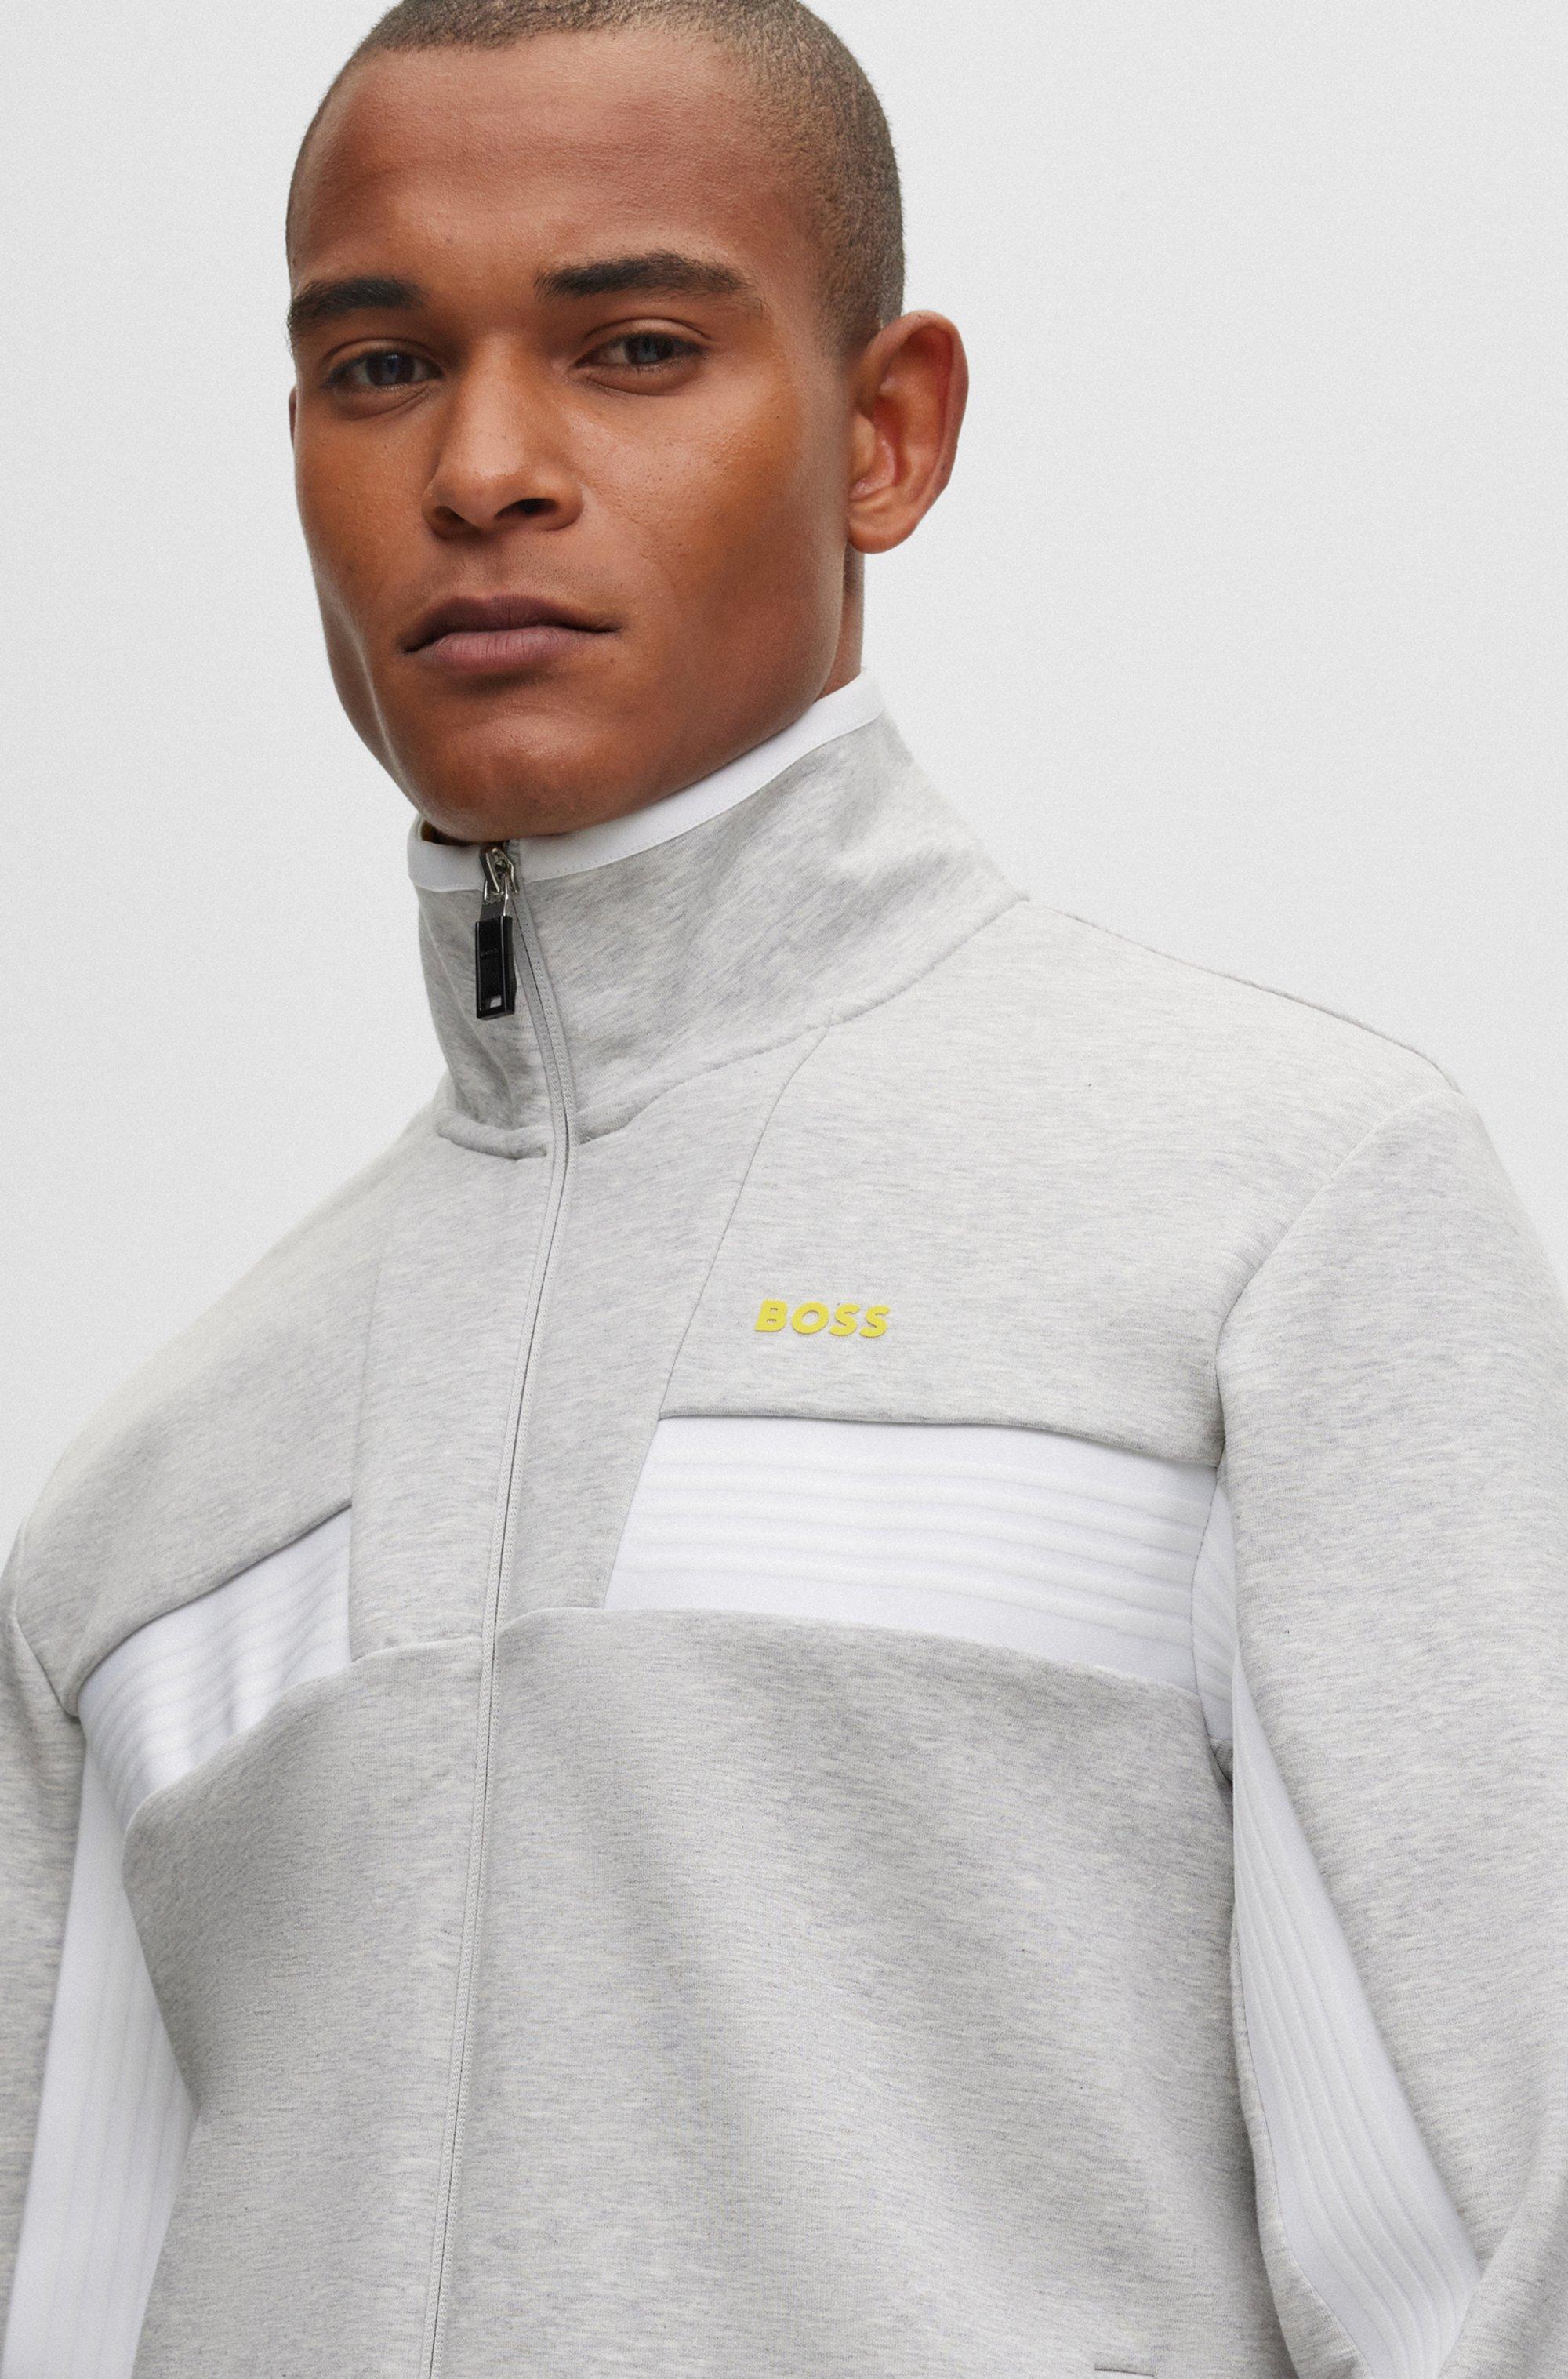 BOSS by HUGO BOSS Cotton-blend Zip-up Sweatshirt With Tape Trims in Gray  for Men | Lyst